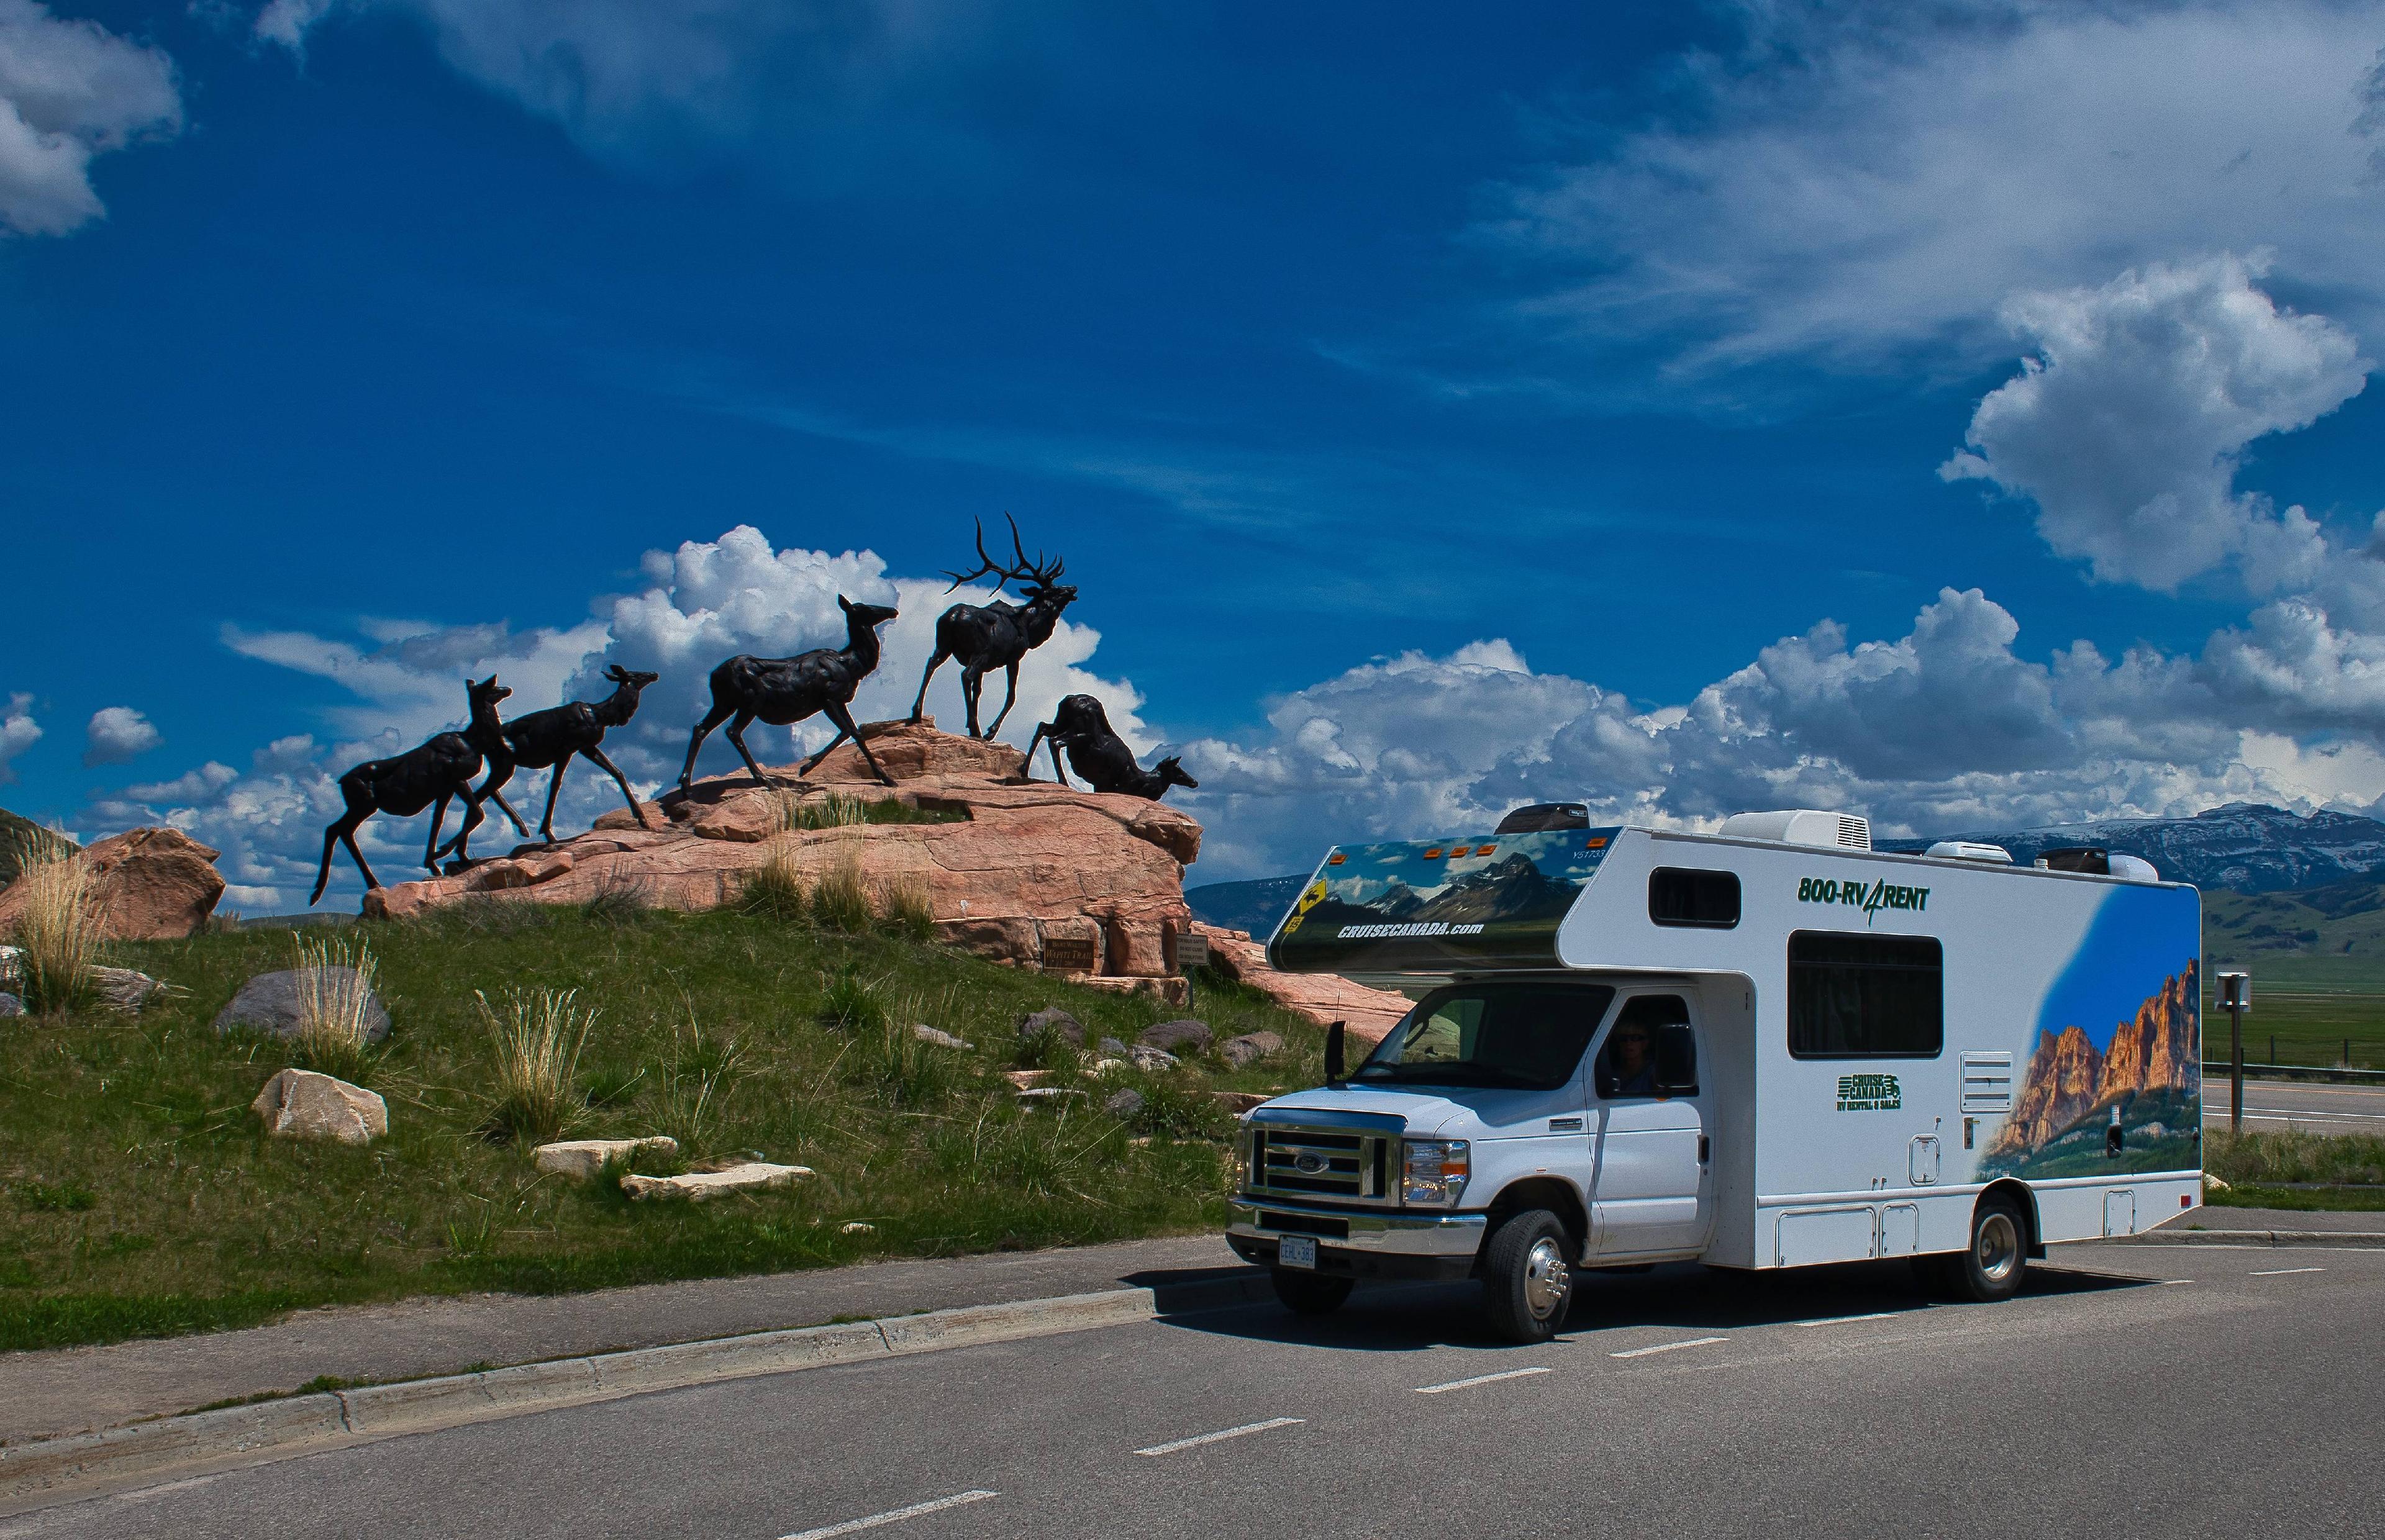 Iconic places and national parks - USA in a motorhome – image 3